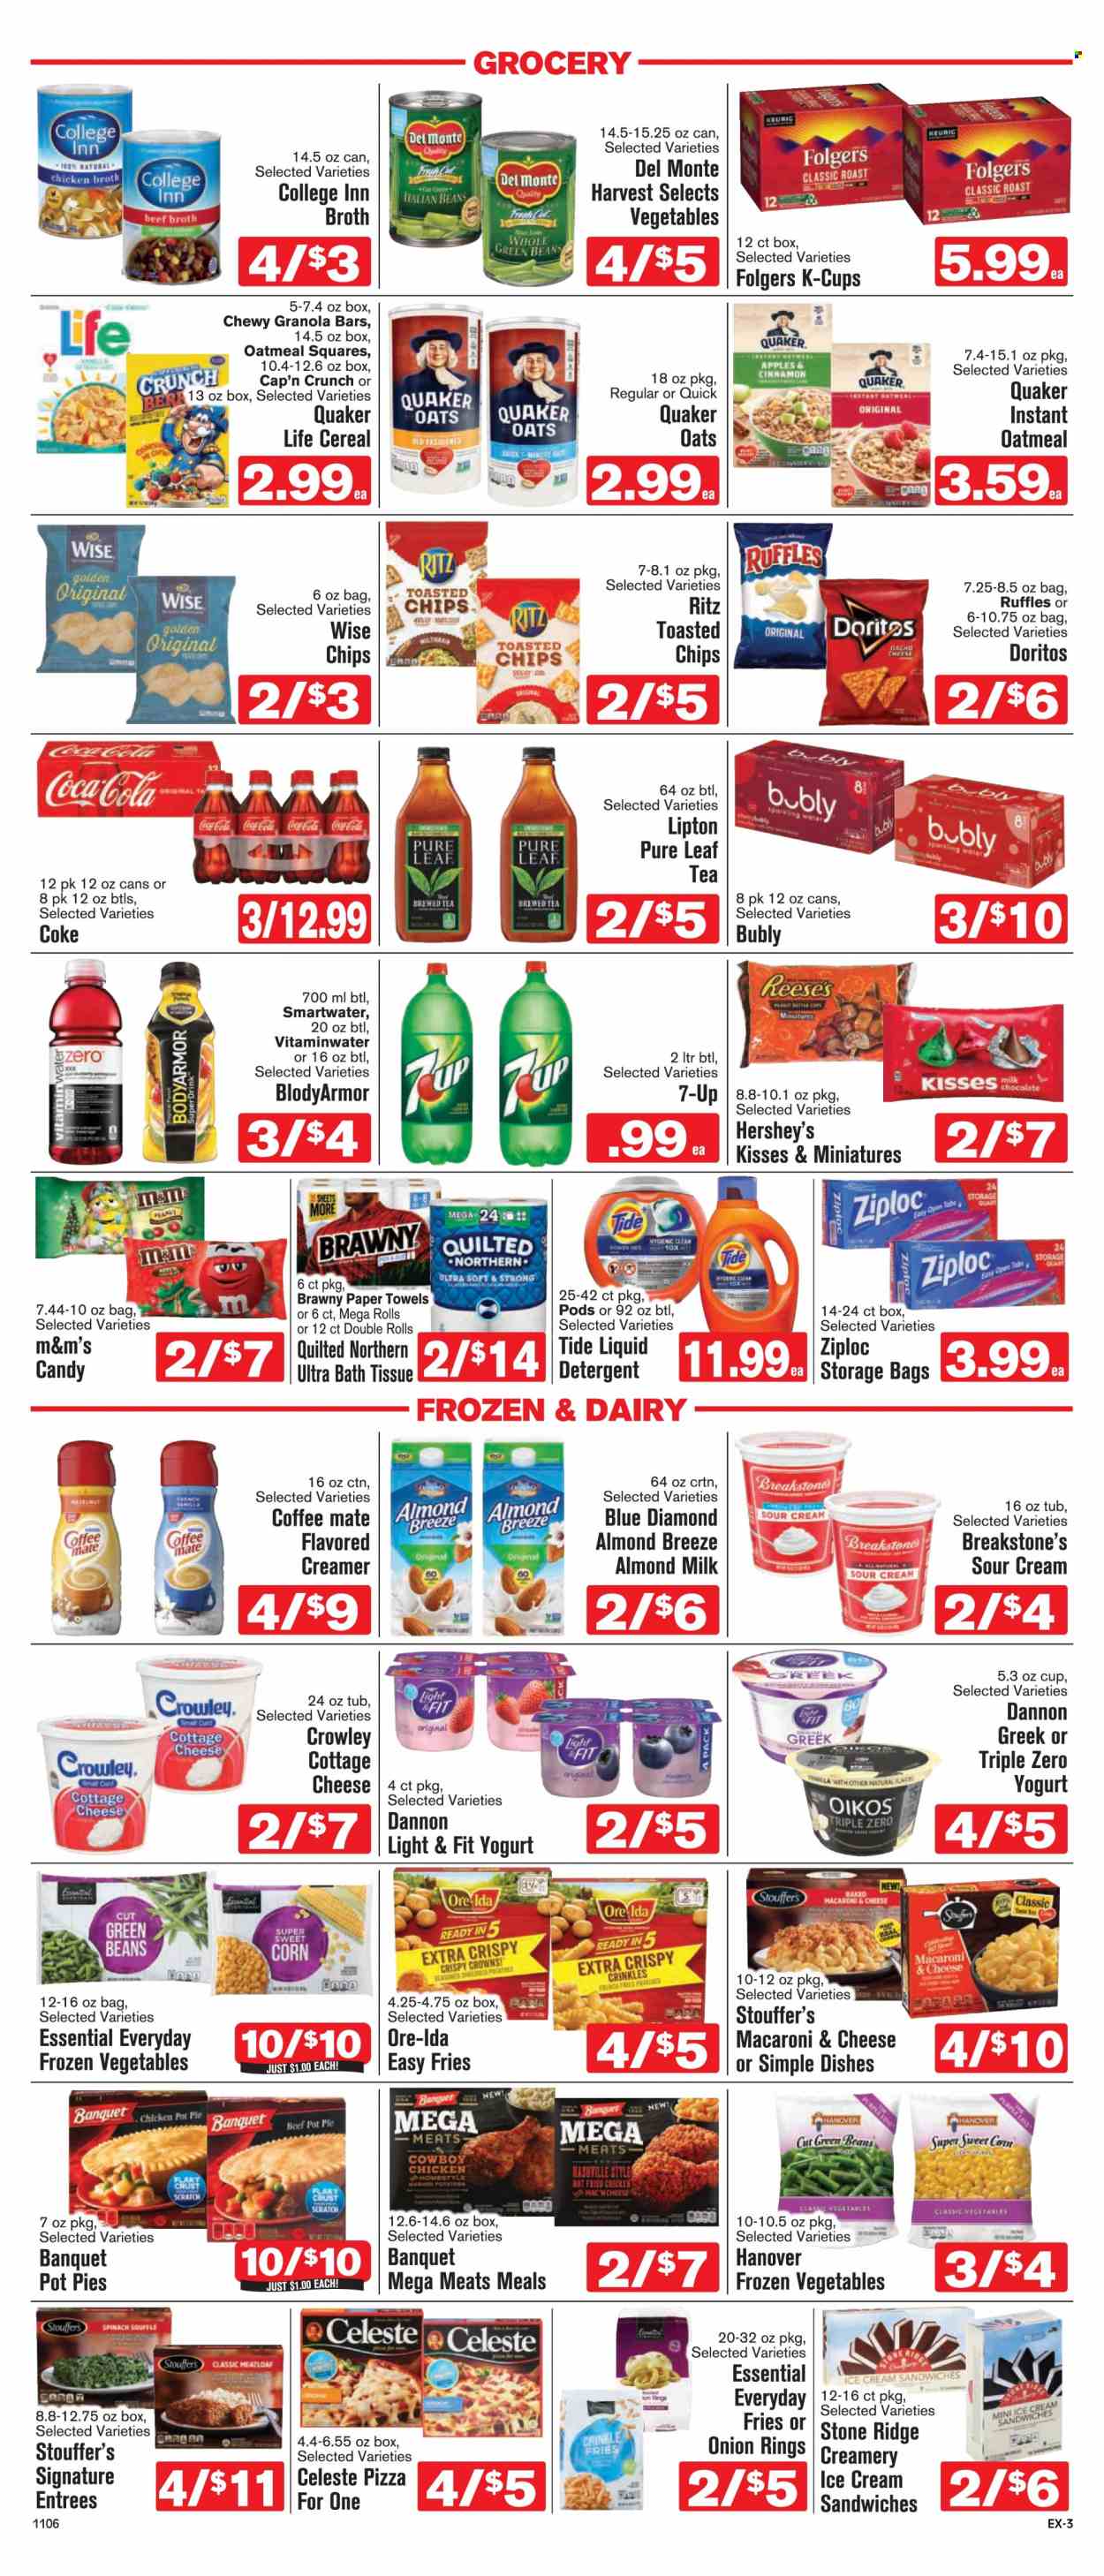 thumbnail - Shop ‘n Save Express Flyer - 11/06/2021 - 11/12/2021 - Sales products - pie, pot pie, corn, green beans, apples, macaroni & cheese, pizza, onion rings, fried chicken, Quaker, cottage cheese, curd, yoghurt, Oikos, Dannon, almond milk, Coffee-Mate, Almond Breeze, sour cream, creamer, ice cream, ice cream sandwich, Reese's, Hershey's, frozen vegetables, Stouffer's, potato fries, Ore-Ida, crinkle fries, Celeste, M&M's, RITZ, Doritos, Ruffles, beef broth, chicken broth, oatmeal, oats, broth, cereals, granola bar, Cap'n Crunch, cinnamon, Blue Diamond, Coca-Cola, Lipton, 7UP, Smartwater, tea, Pure Leaf, Folgers, coffee capsules, K-Cups, Keurig, red wine, wine, bath tissue, Quilted Northern, kitchen towels, paper towels, detergent, Tide. Page 3.